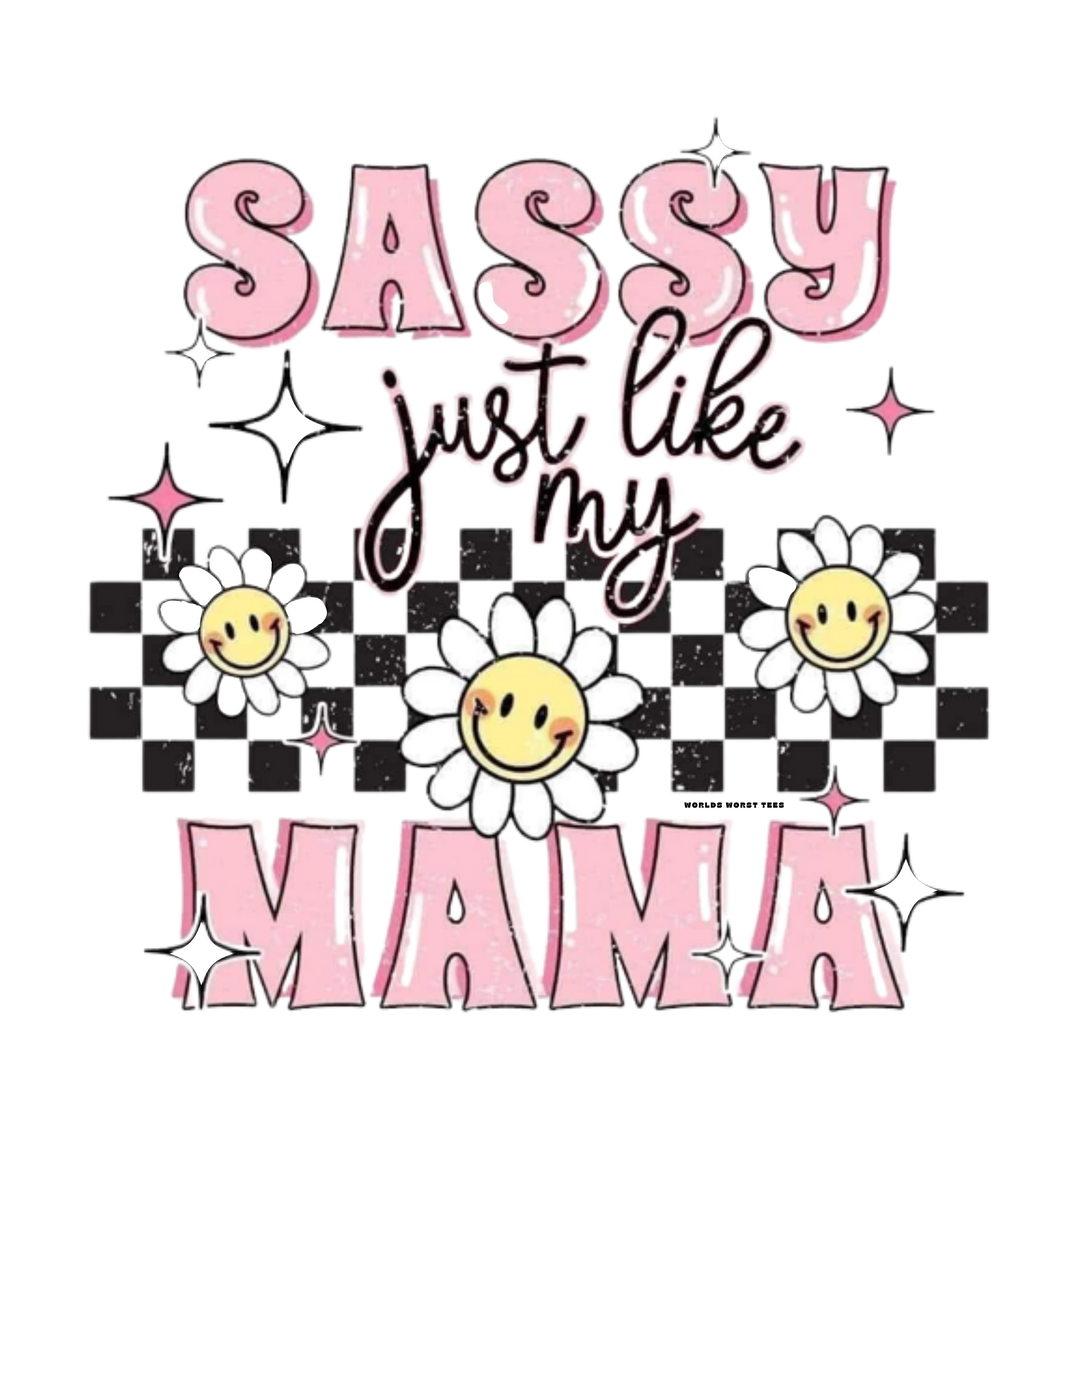 Sassy Just Like My Mama Toddler Tee featuring playful flower graphics and bold text. 100% cotton, heavy fabric for all-day comfort. Classic fit in various sizes.